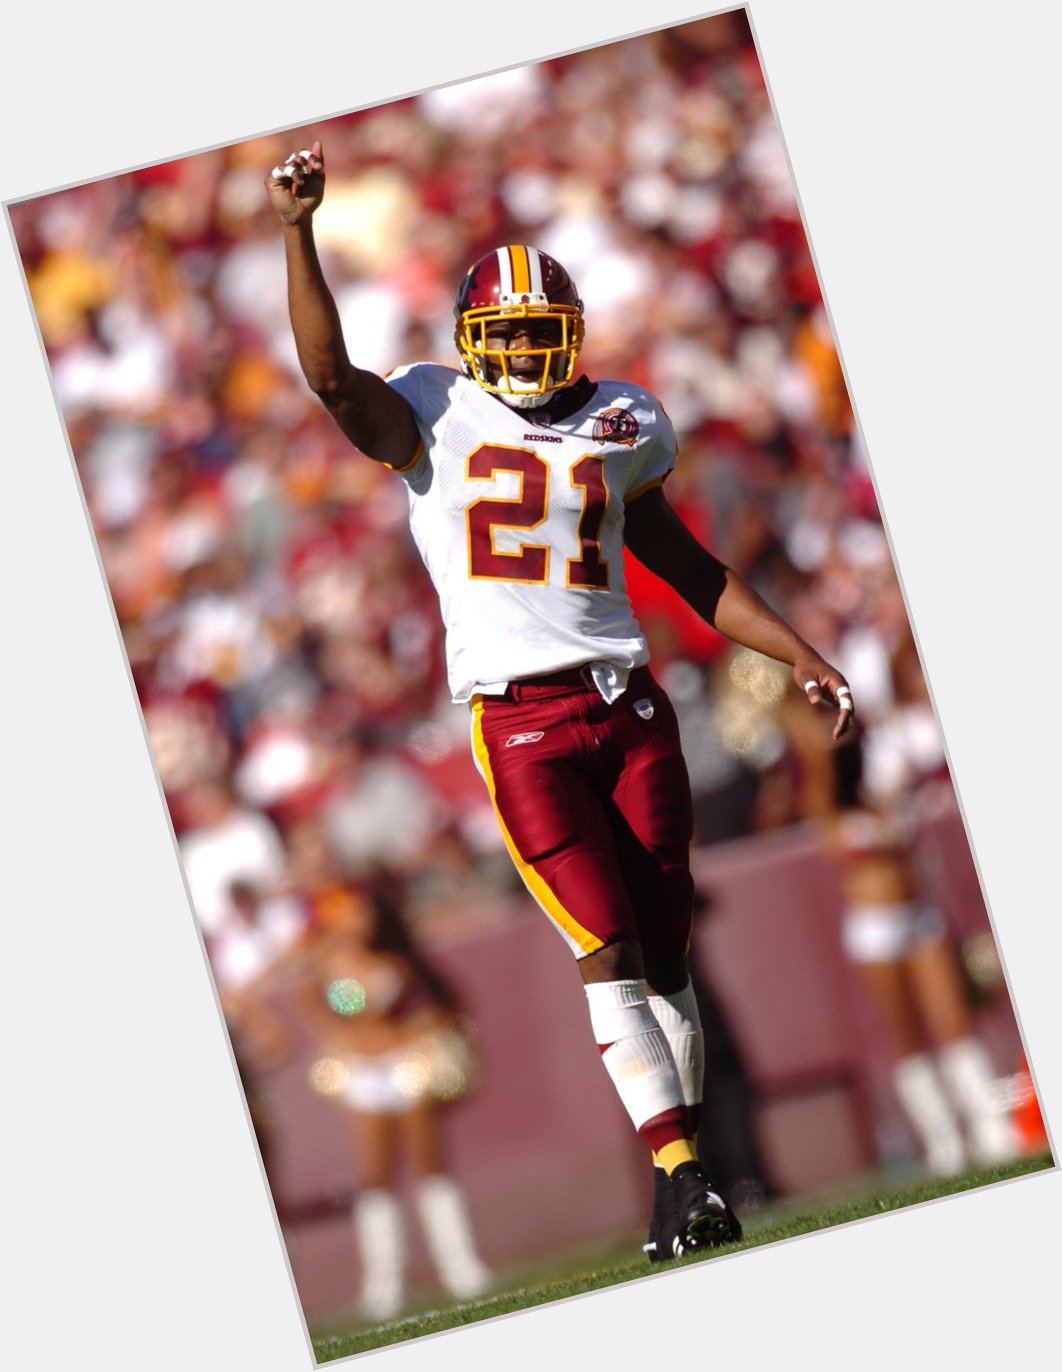 Happy Birthday to the late, great Sean Taylor. He would\ve been 35 today. 